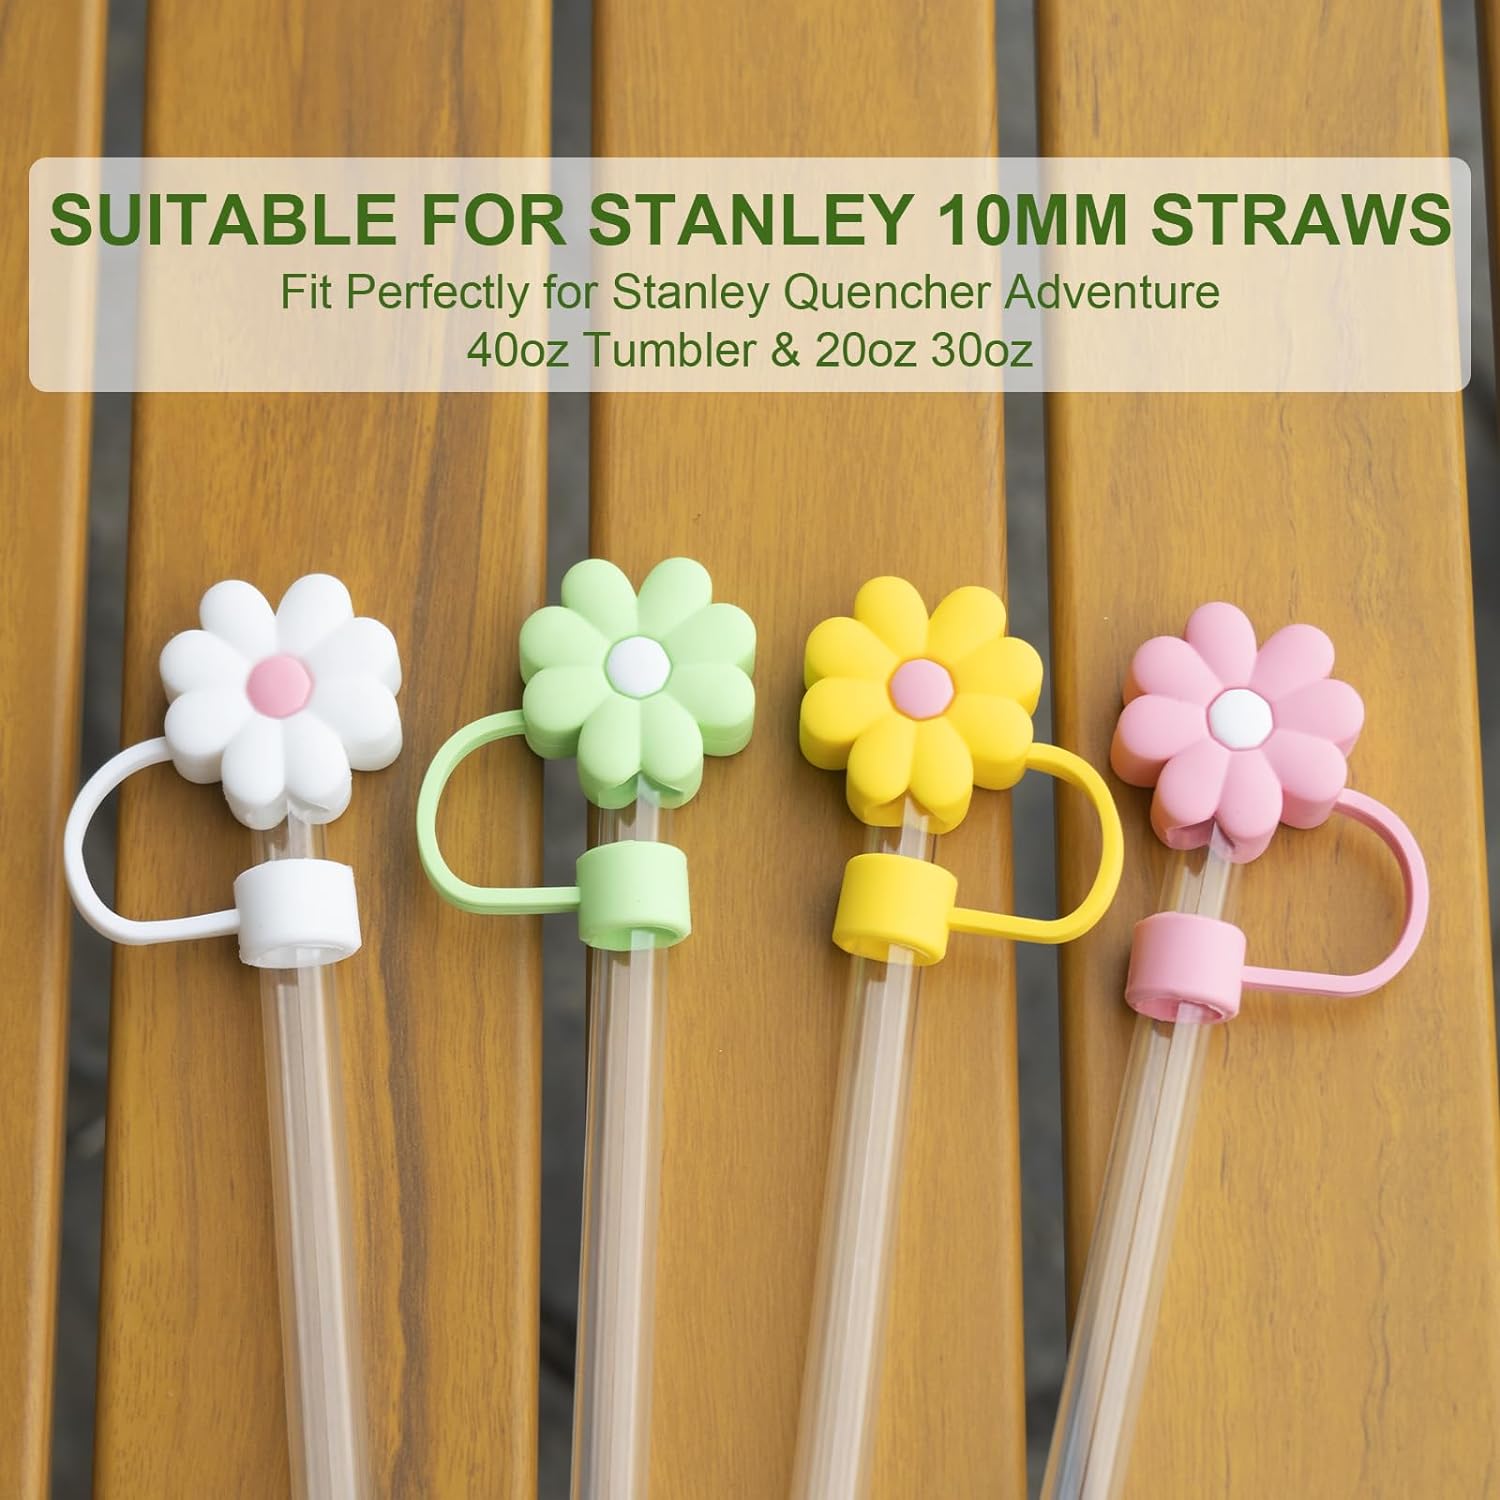 4Pcs 0.4in Diameter Cute Silicone Straw Covers Cap for Stanley Cup, Dust-Proof Drinking Straw Reusable Straw Tips Lids